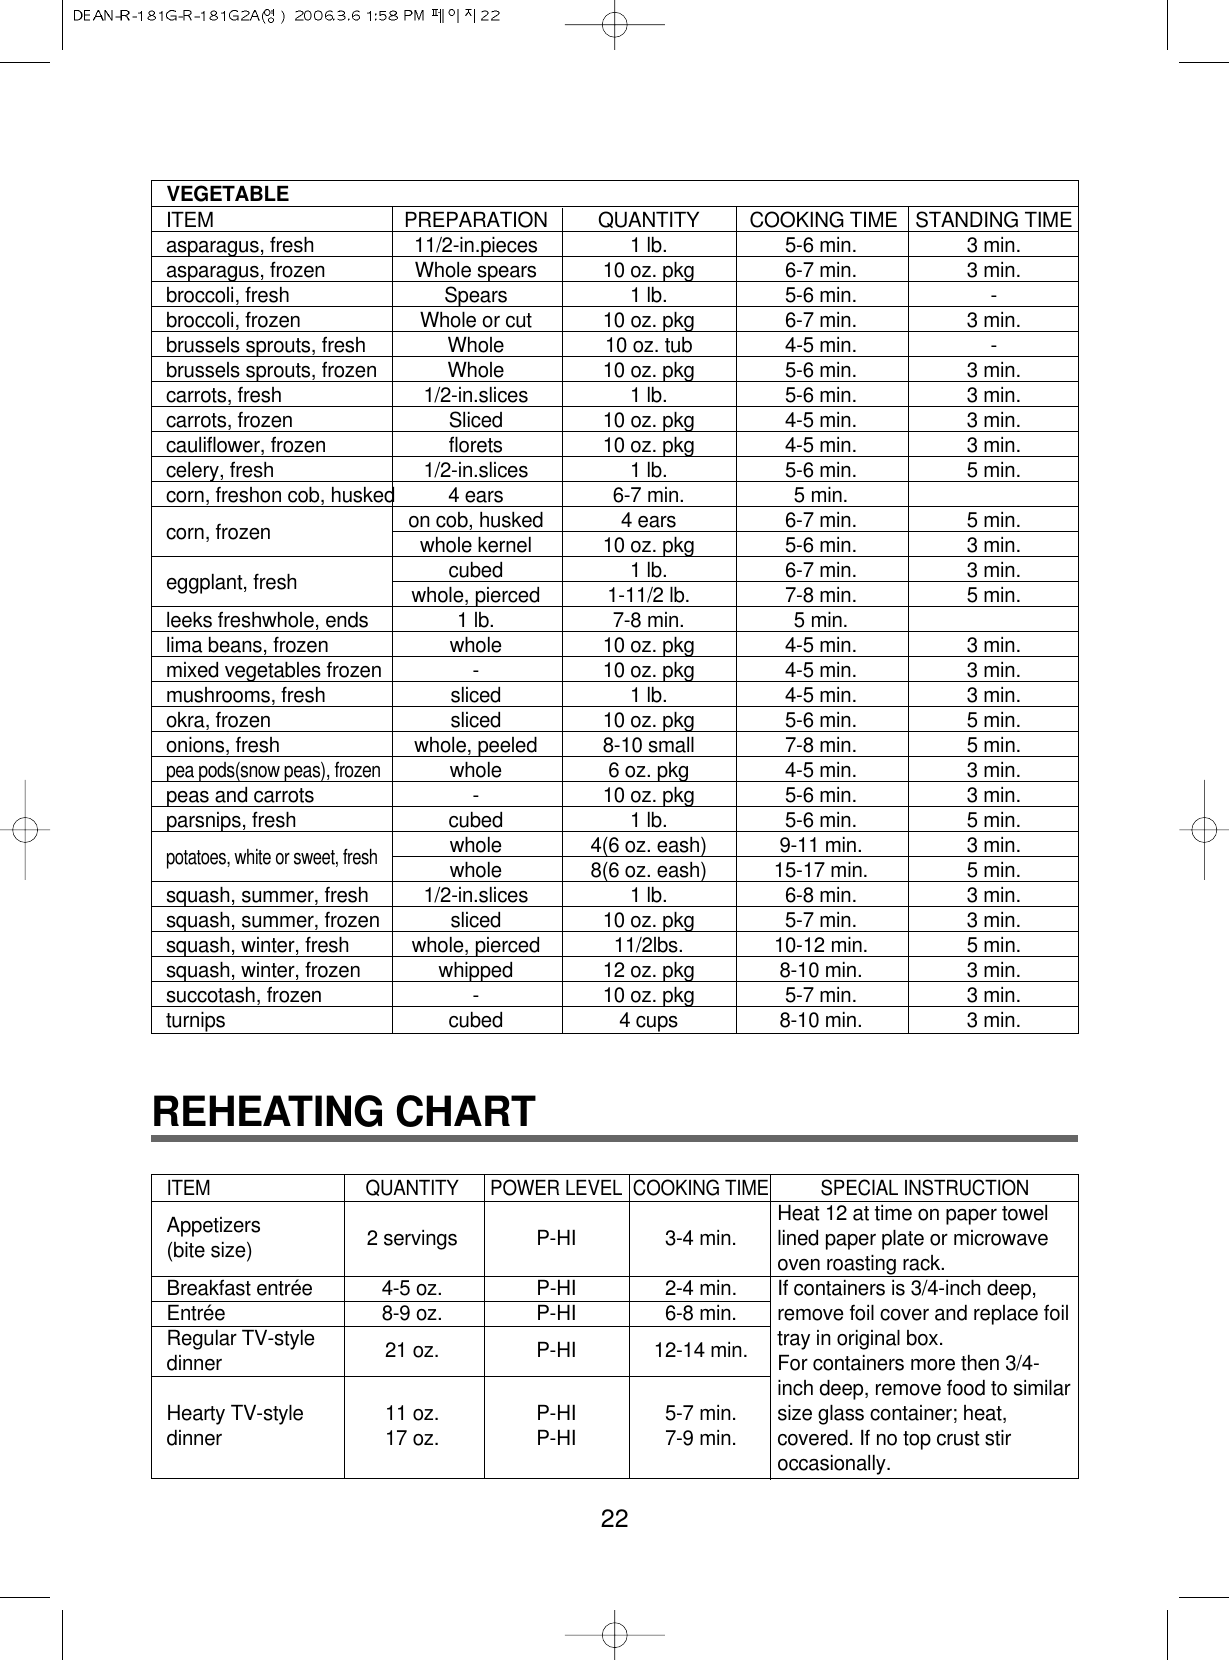 REHEATING CHART22VEGETABLEITEM PREPARATION QUANTITY COOKING TIME STANDING TIMEasparagus, fresh 11/2-in.pieces 1 lb. 5-6 min. 3 min.asparagus, frozen Whole spears 10 oz. pkg 6-7 min. 3 min.broccoli, fresh Spears 1 lb. 5-6 min. -broccoli, frozen Whole or cut 10 oz. pkg 6-7 min. 3 min.brussels sprouts, fresh Whole 10 oz. tub 4-5 min. -brussels sprouts, frozen Whole 10 oz. pkg 5-6 min. 3 min.carrots, fresh 1/2-in.slices 1 lb. 5-6 min. 3 min.carrots, frozen Sliced 10 oz. pkg 4-5 min. 3 min.cauliflower, frozen florets 10 oz. pkg 4-5 min. 3 min.celery, fresh 1/2-in.slices 1 lb. 5-6 min. 5 min.corn, freshon cob, husked 4 ears 6-7 min. 5 min.corn, frozen on cob, husked 4 ears 6-7 min. 5 min.whole kernel 10 oz. pkg 5-6 min. 3 min.eggplant, fresh cubed 1 lb. 6-7 min. 3 min.whole, pierced 1-11/2 lb. 7-8 min. 5 min.leeks freshwhole, ends 1 lb. 7-8 min. 5 min.lima beans, frozen whole 10 oz. pkg 4-5 min. 3 min.mixed vegetables frozen - 10 oz. pkg 4-5 min. 3 min.mushrooms, fresh sliced 1 lb. 4-5 min. 3 min.okra, frozen sliced 10 oz. pkg 5-6 min. 5 min.onions, fresh whole, peeled 8-10 small 7-8 min. 5 min.pea pods(snow peas), frozenwhole 6 oz. pkg 4-5 min. 3 min.peas and carrots - 10 oz. pkg 5-6 min. 3 min.parsnips, fresh cubed 1 lb. 5-6 min. 5 min.potatoes, white or sweet, freshwhole 4(6 oz. eash) 9-11 min. 3 min.whole 8(6 oz. eash) 15-17 min. 5 min.squash, summer, fresh 1/2-in.slices 1 lb. 6-8 min. 3 min.squash, summer, frozen sliced 10 oz. pkg 5-7 min. 3 min.squash, winter, fresh whole, pierced 11/2lbs. 10-12 min. 5 min.squash, winter, frozen whipped 12 oz. pkg 8-10 min. 3 min.succotash, frozen - 10 oz. pkg 5-7 min. 3 min.turnips cubed 4 cups 8-10 min. 3 min.ITEM QUANTITY POWER LEVEL COOKING TIME SPECIAL INSTRUCTIONAppetizers(bite size) 2 servings P-HI 3-4 min.Breakfast entrée 4-5 oz. P-HI 2-4 min.Entrée 8-9 oz. P-HI 6-8 min.Regular TV-style 21 oz. P-HI 12-14 min.dinnerHearty TV-style 11 oz. P-HI 5-7 min.dinner 17 oz. P-HI 7-9 min.Heat 12 at time on paper towellined paper plate or microwaveoven roasting rack.If containers is 3/4-inch deep,remove foil cover and replace foiltray in original box.For containers more then 3/4-inch deep, remove food to similarsize glass container; heat,covered. If no top crust stiroccasionally.